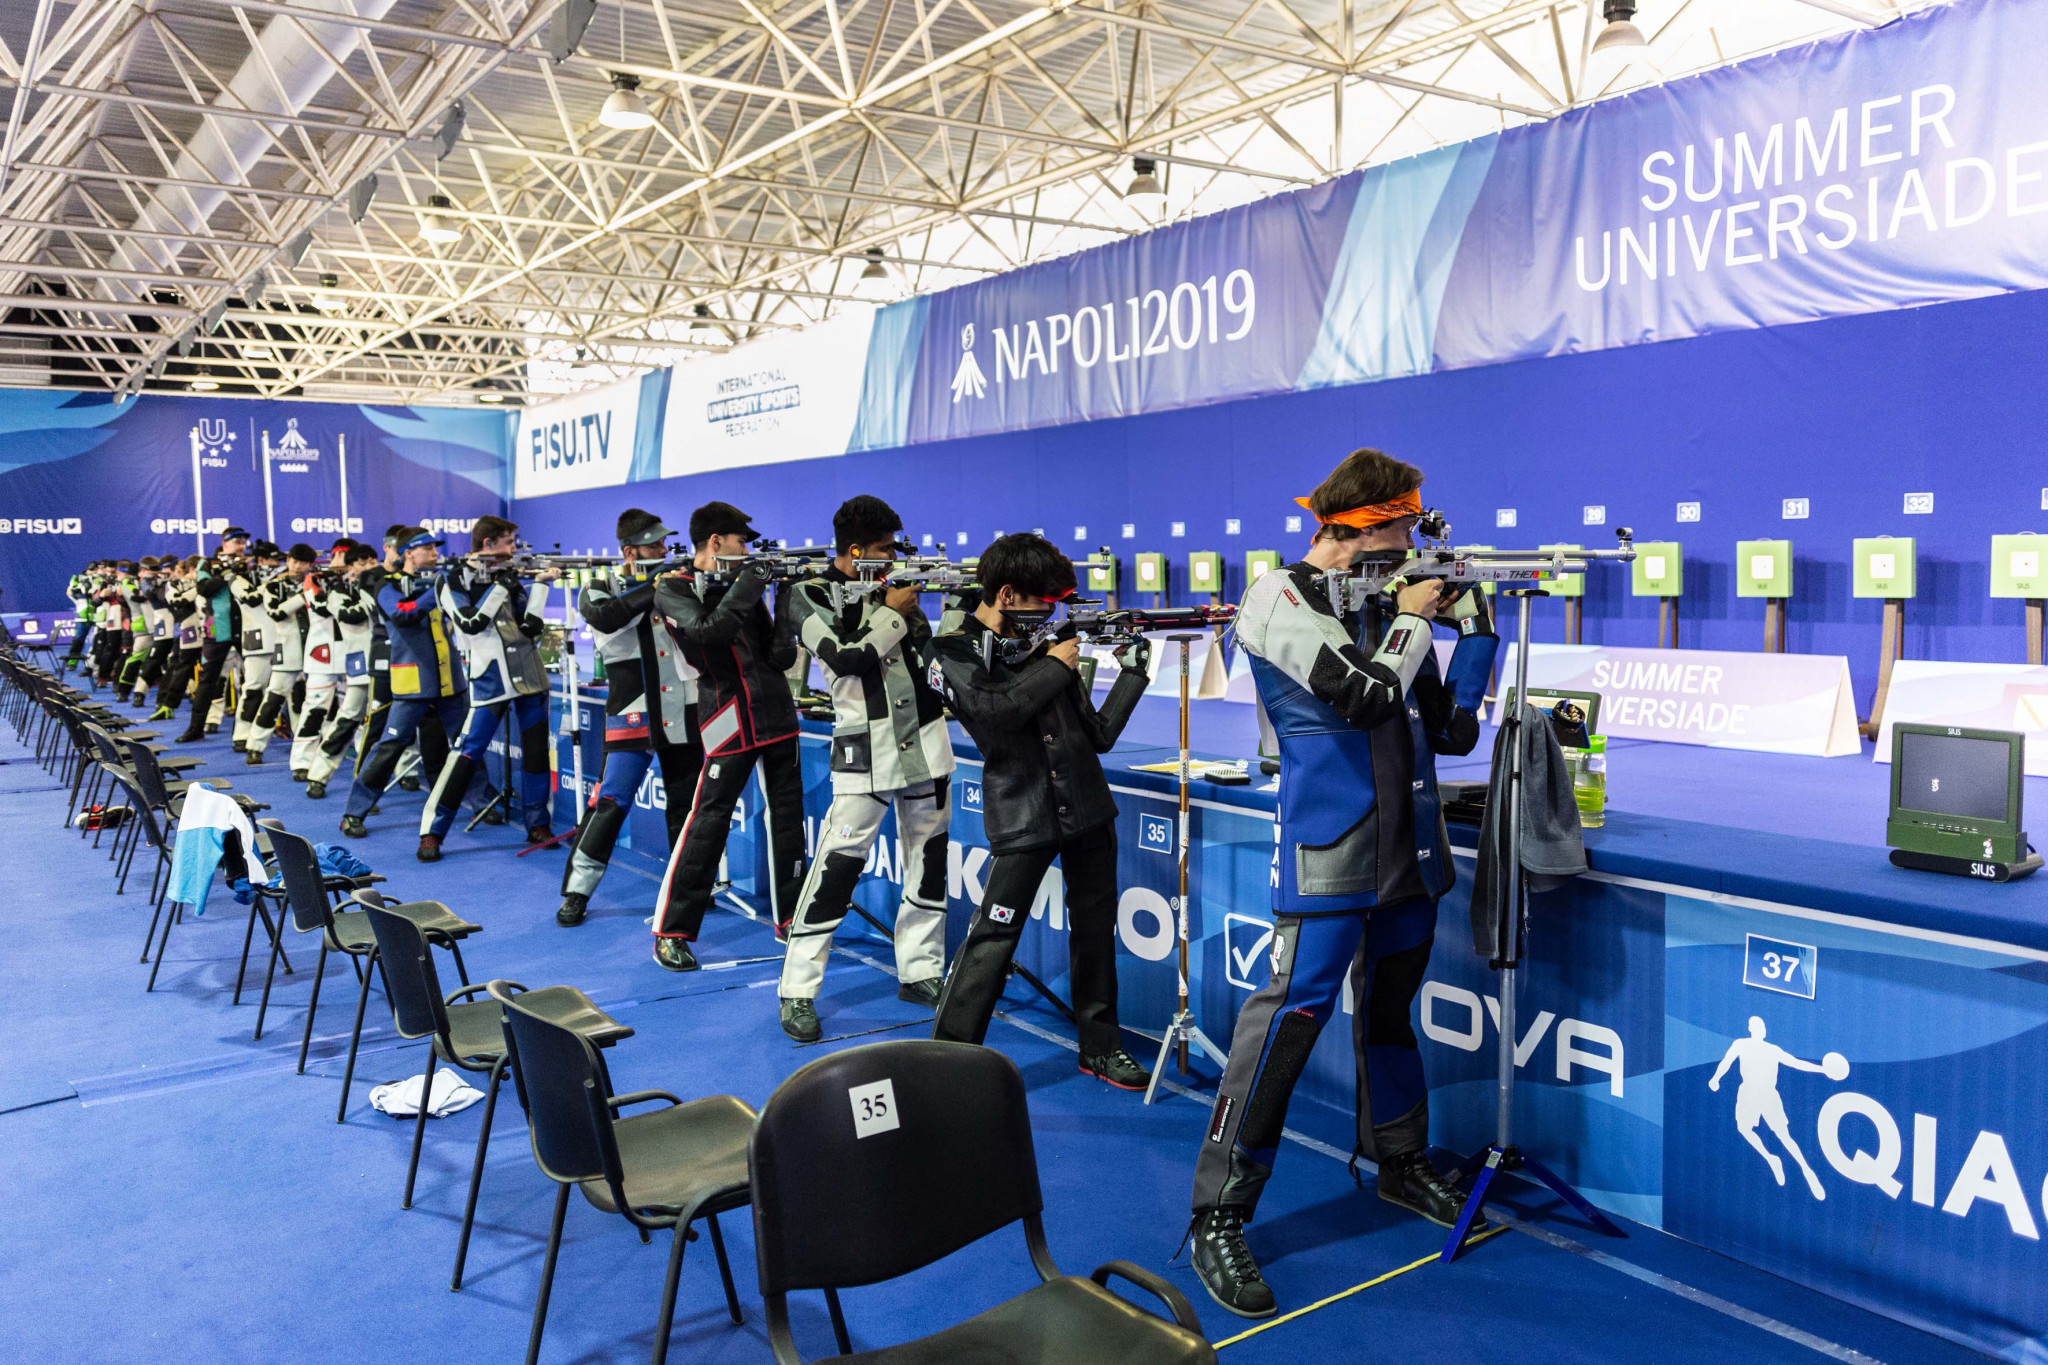 Shooters take aim during the men's 10m air rifle qualification round at Mostra d'Oltremare ©Naples 2019